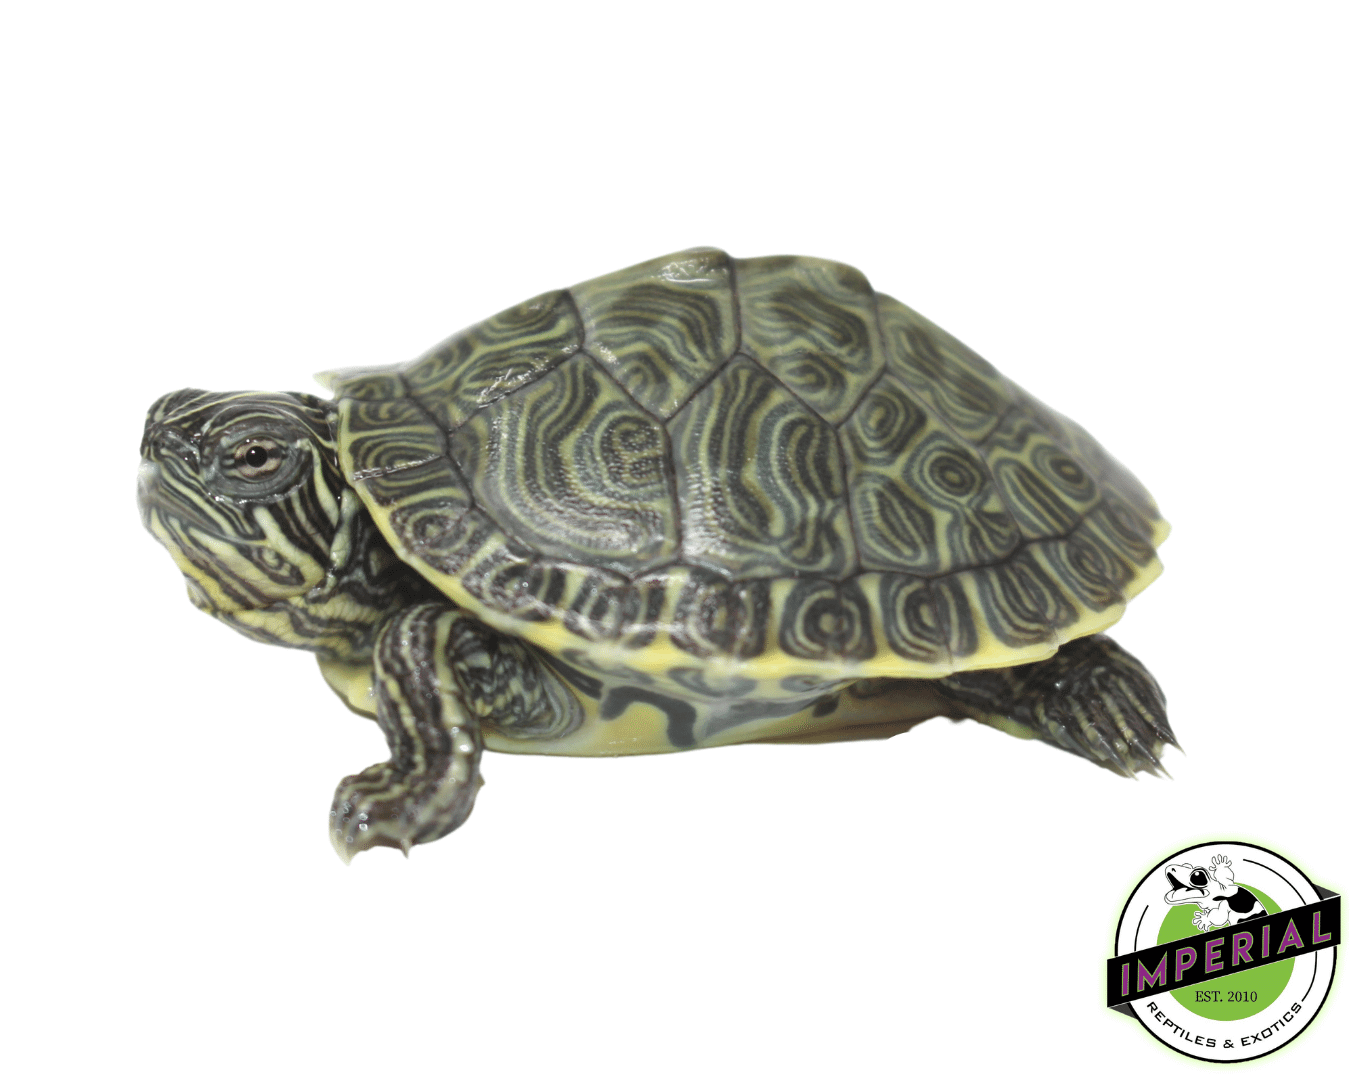 Hieroglyphic River cooter turtle for sale, buy reptiles online